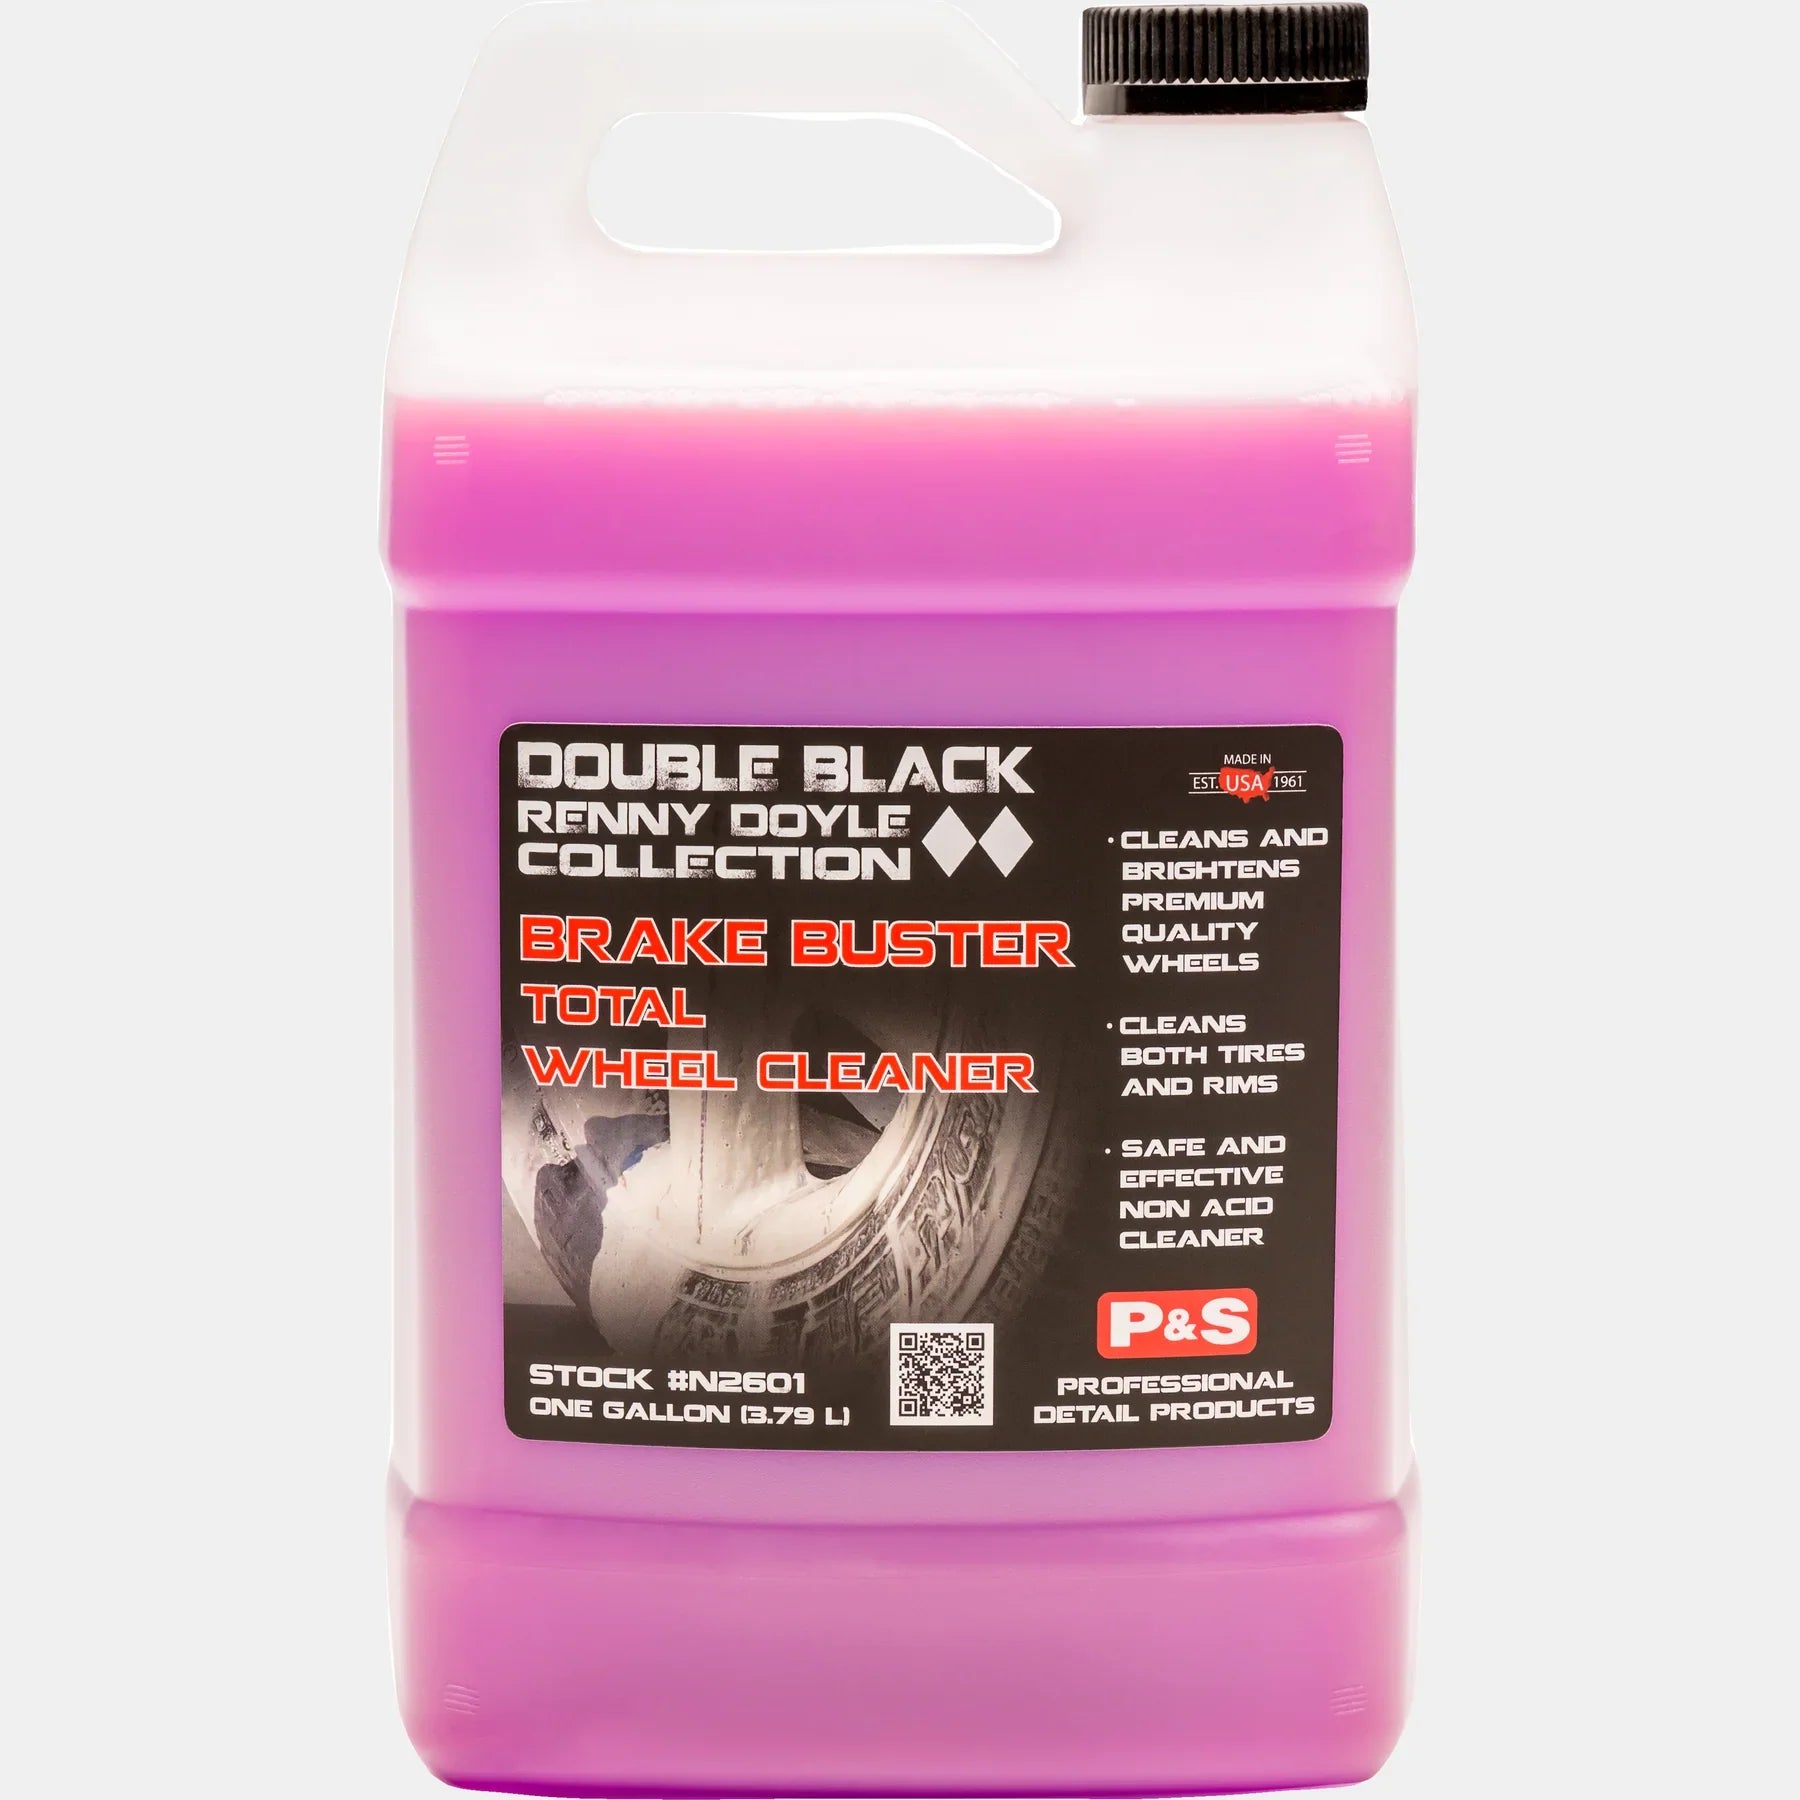 One-gallon container of P&S Brake Buster Total Wheel Cleaner, ready to tackle tough brake dust and stains.